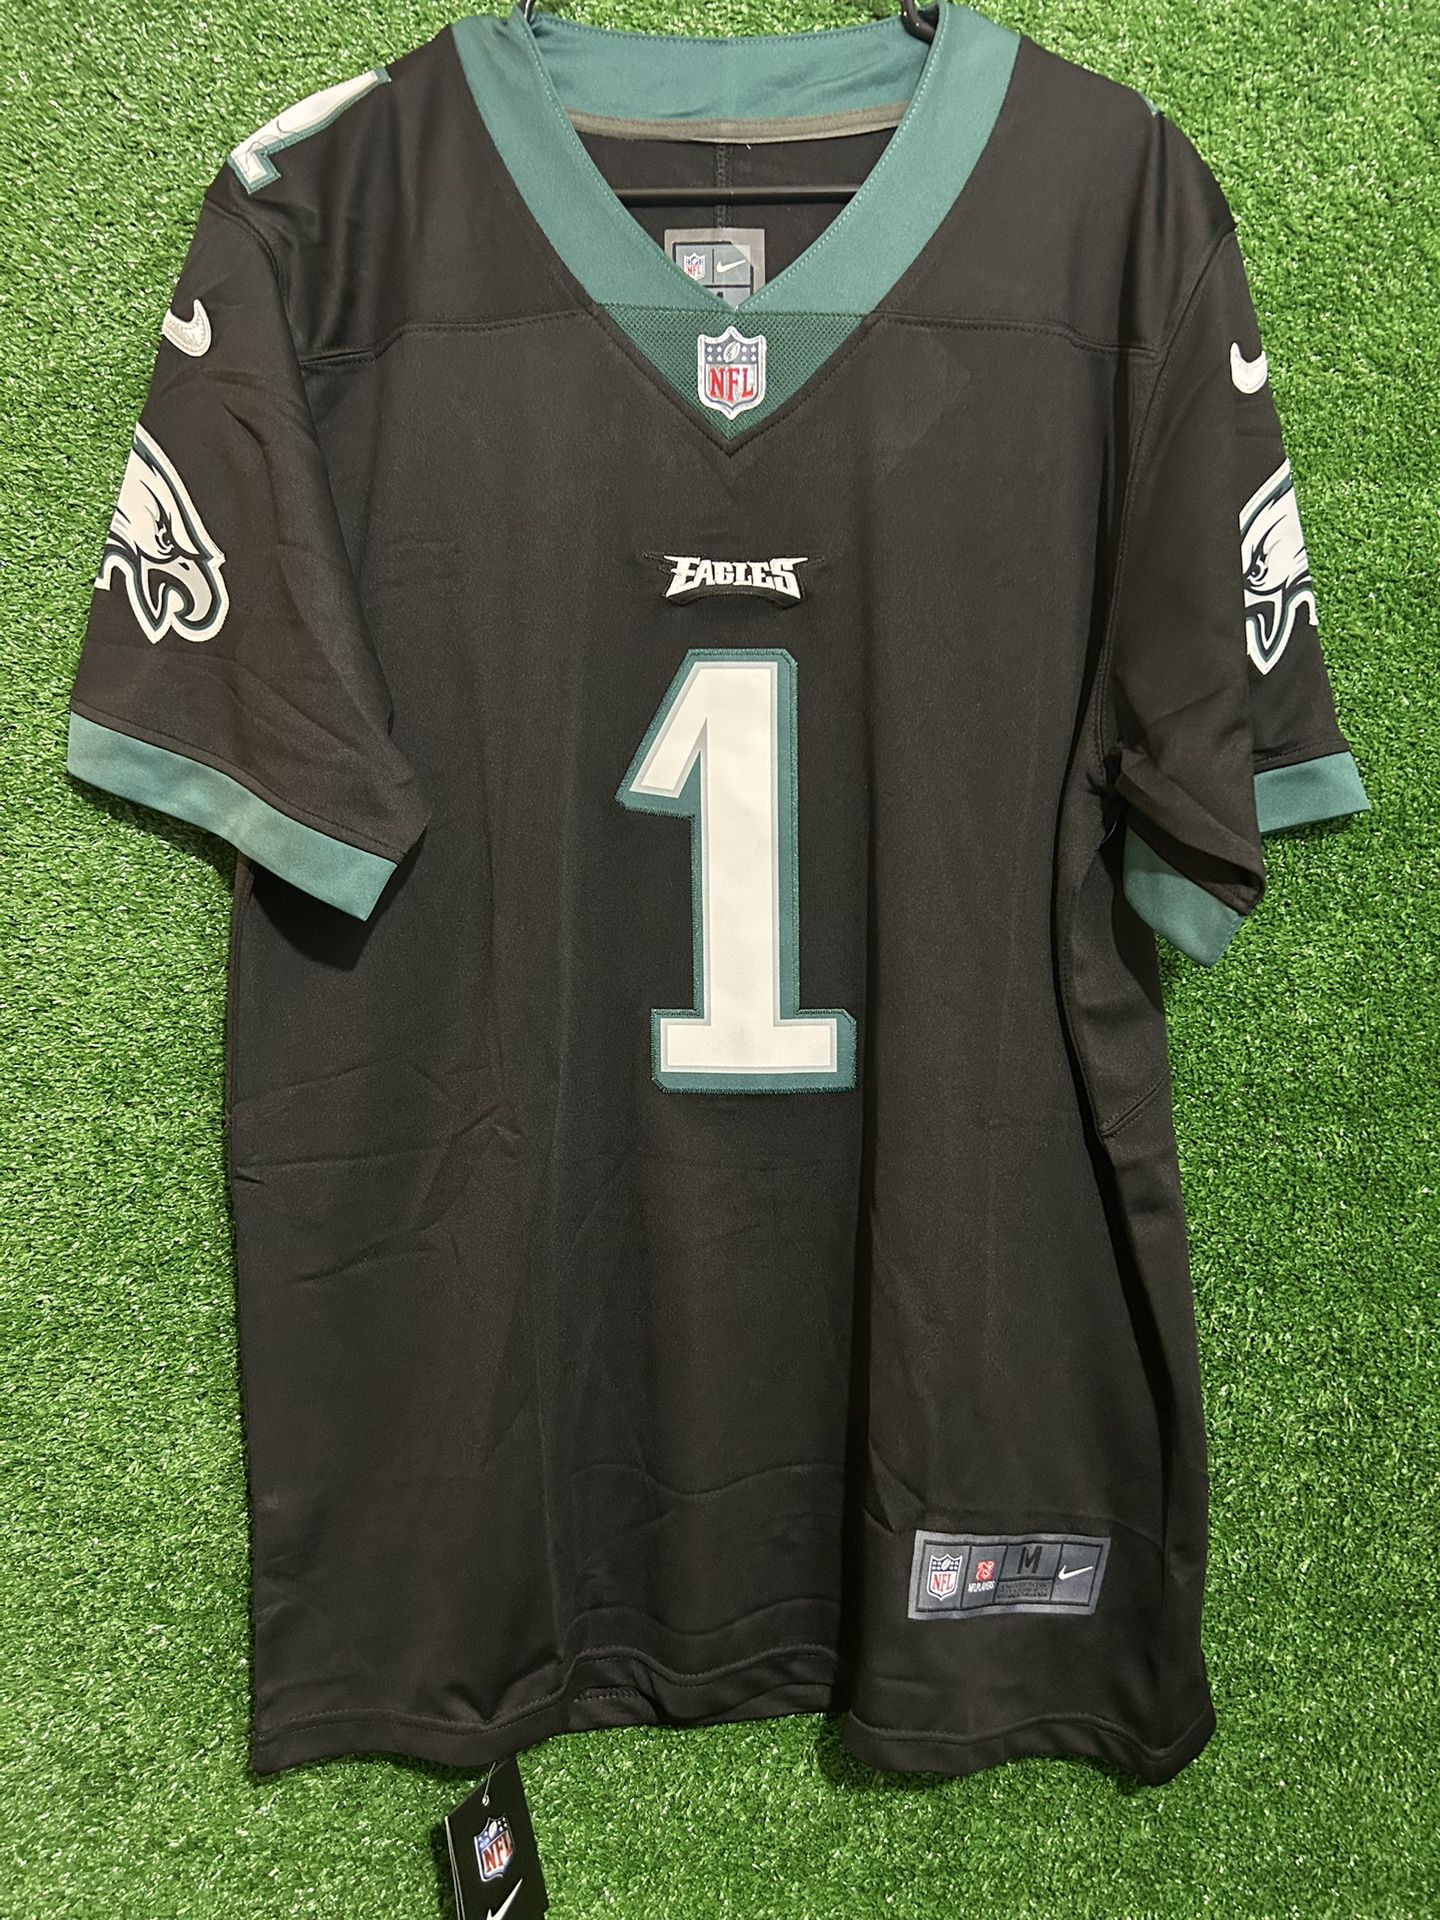 JALEN HURTS PHILADELPHIA EAGLES NIKE JERSEY BRAND NEW WITH TAGS SIZES MEDIUM, LARGE AND XL AVAILABLE